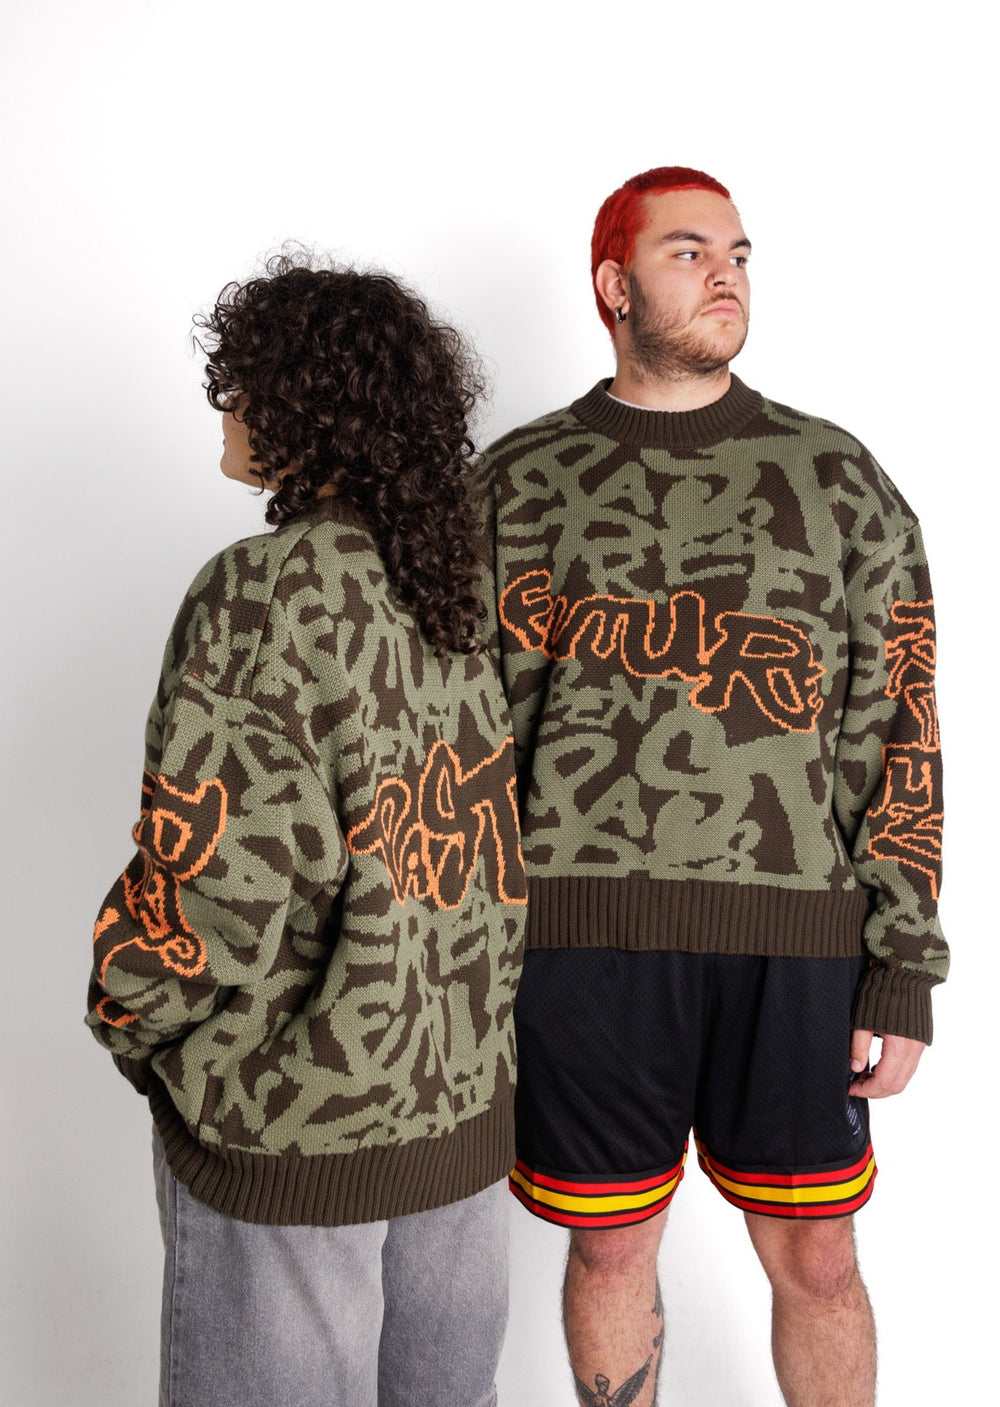 Clothing The Gaps. Past Present Future Knit Jumper. Khaki green colorway heavyweight 100% cotton oversized boxy fit. Has the words 'Past Present Future', in a kahki green graffiti background and 'future' on the front, 'past' on the back, and 'present' running down the arm in a orange outline. The background pattern seamlessly weaves the words past, present, and future. With khaki knitted cuffs and waistband.